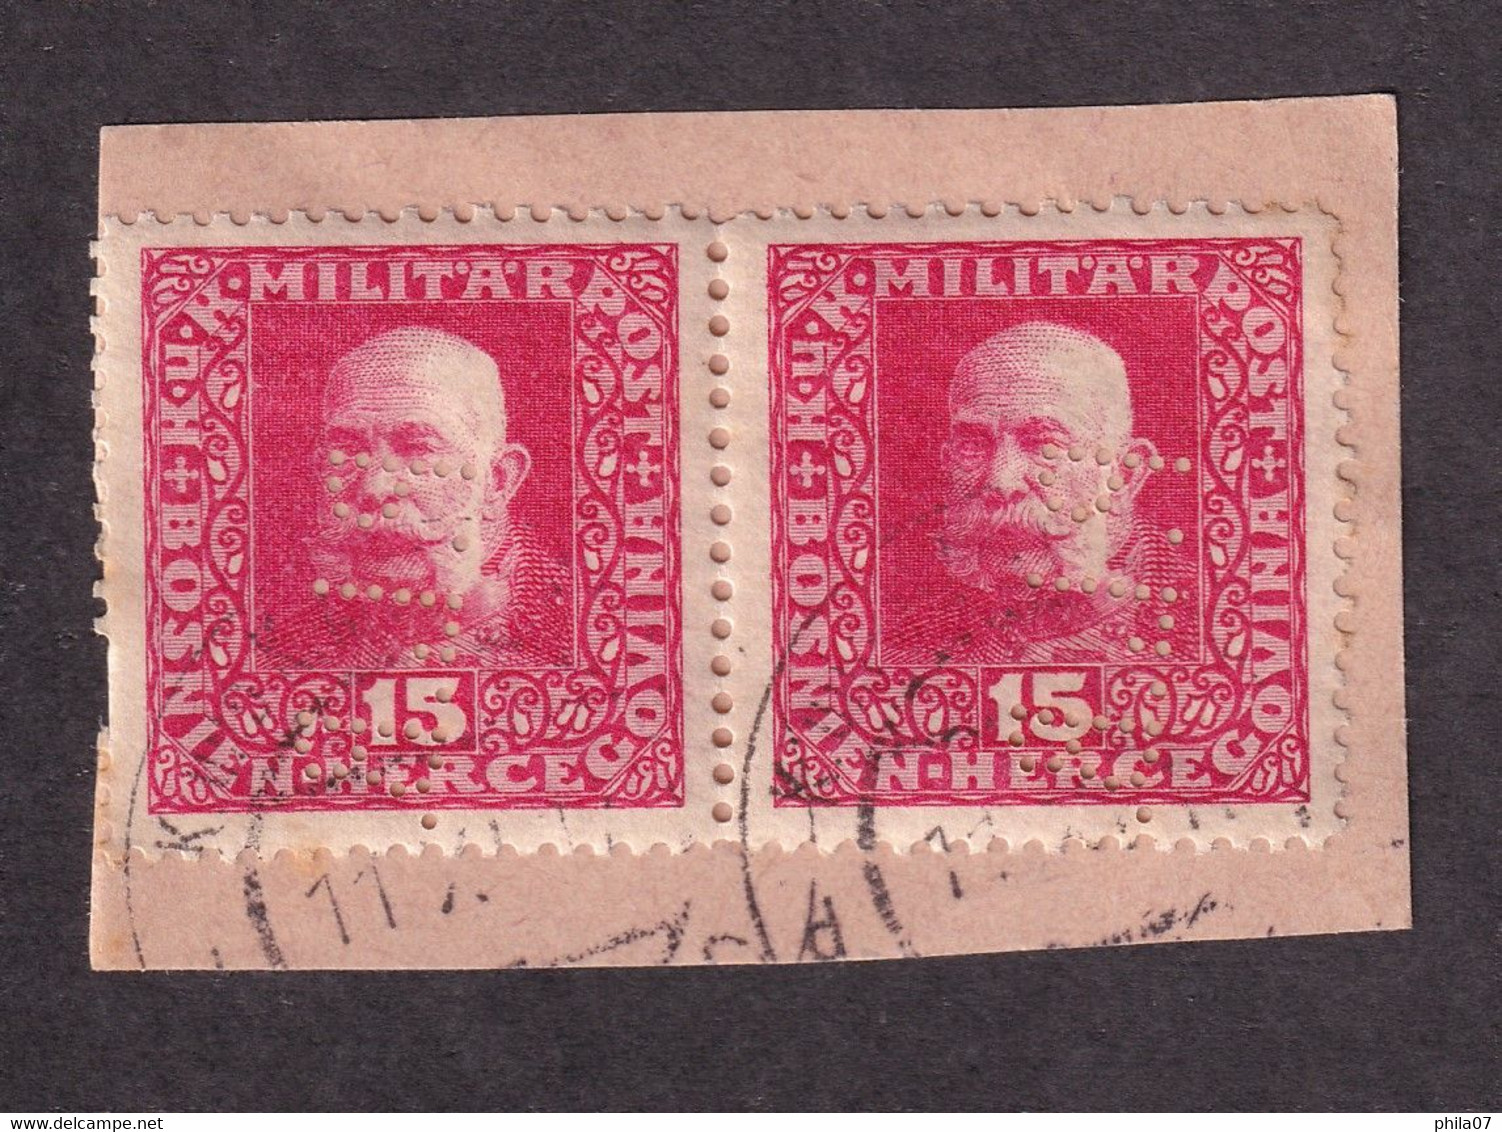 Bosnia And Herzegovina - Fragment With Stamps 15 Hellera In Pair With Perforation P.L.B. (Privilegirte Landes Bank) - Bosnia And Herzegovina